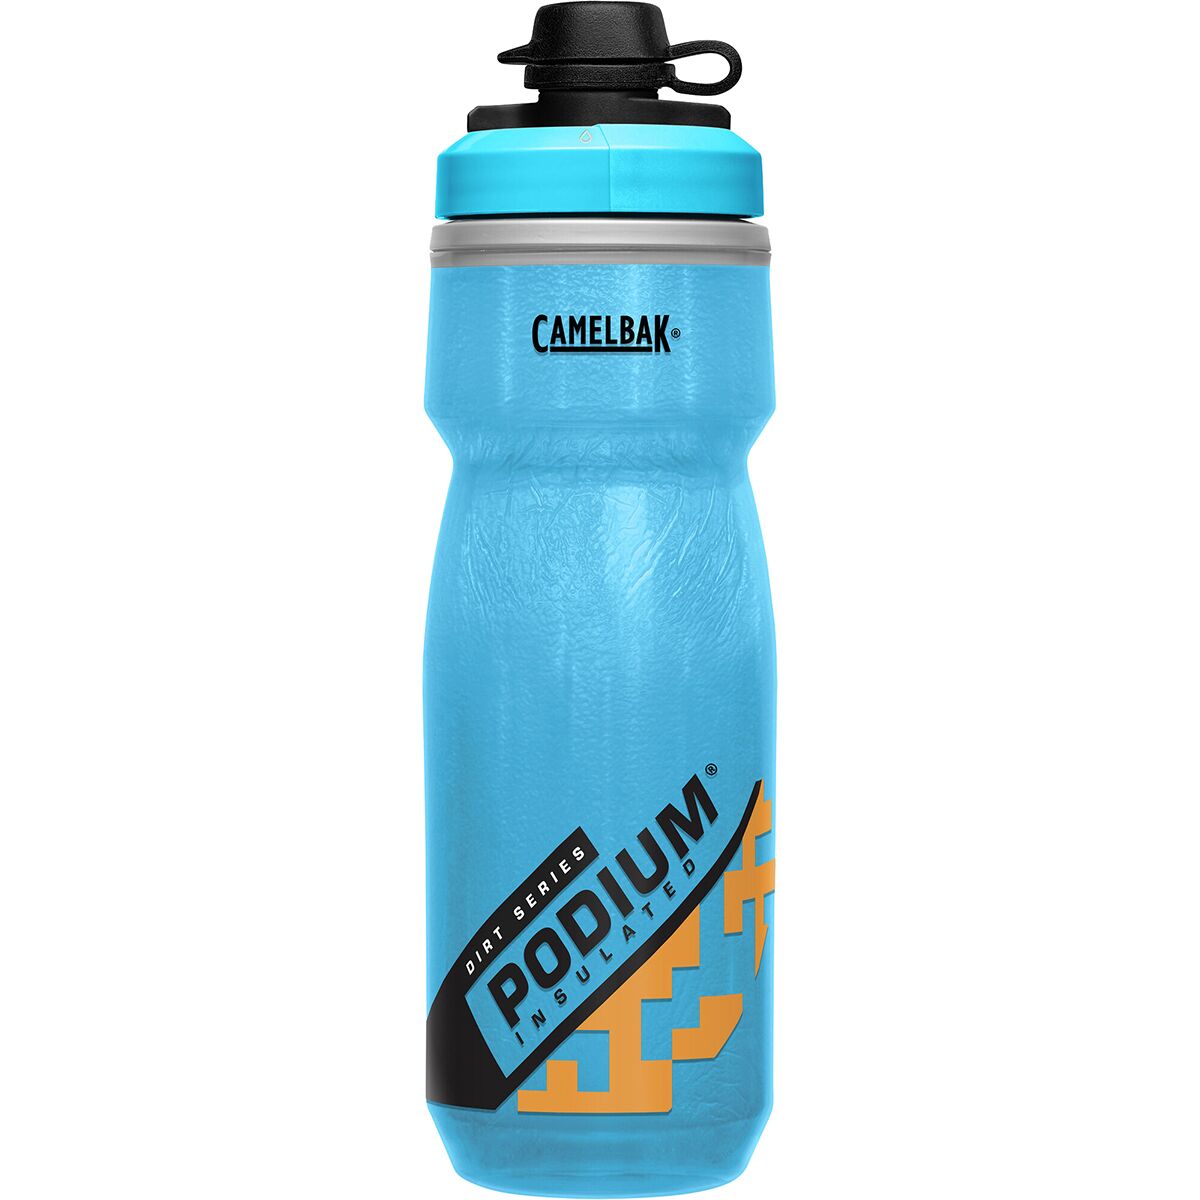 Series Podium Chill Bottle - Hike Camp